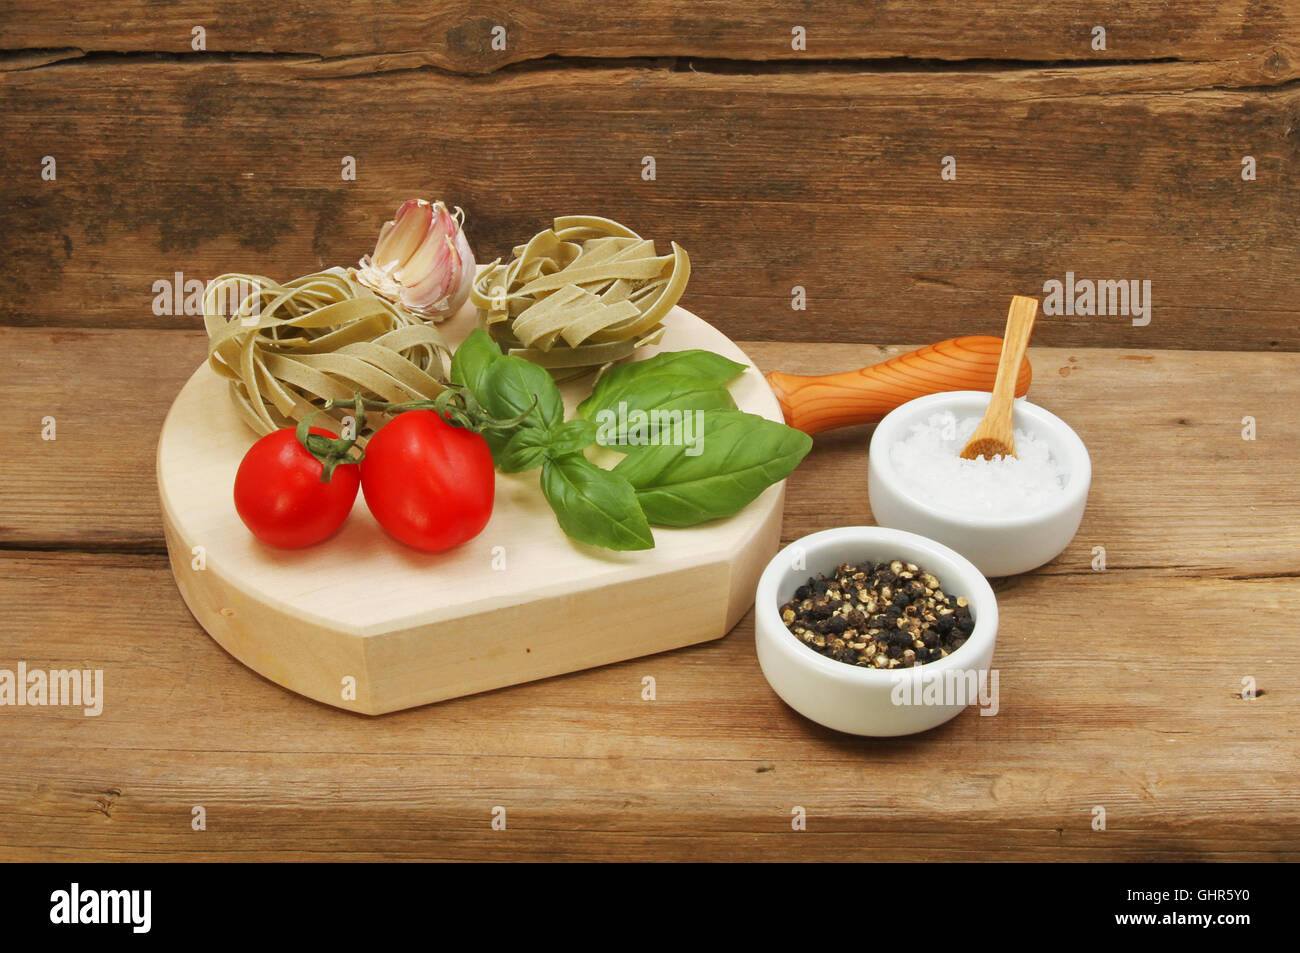 Tagliatelle and ingredients on a background of weathered wood Stock Photo